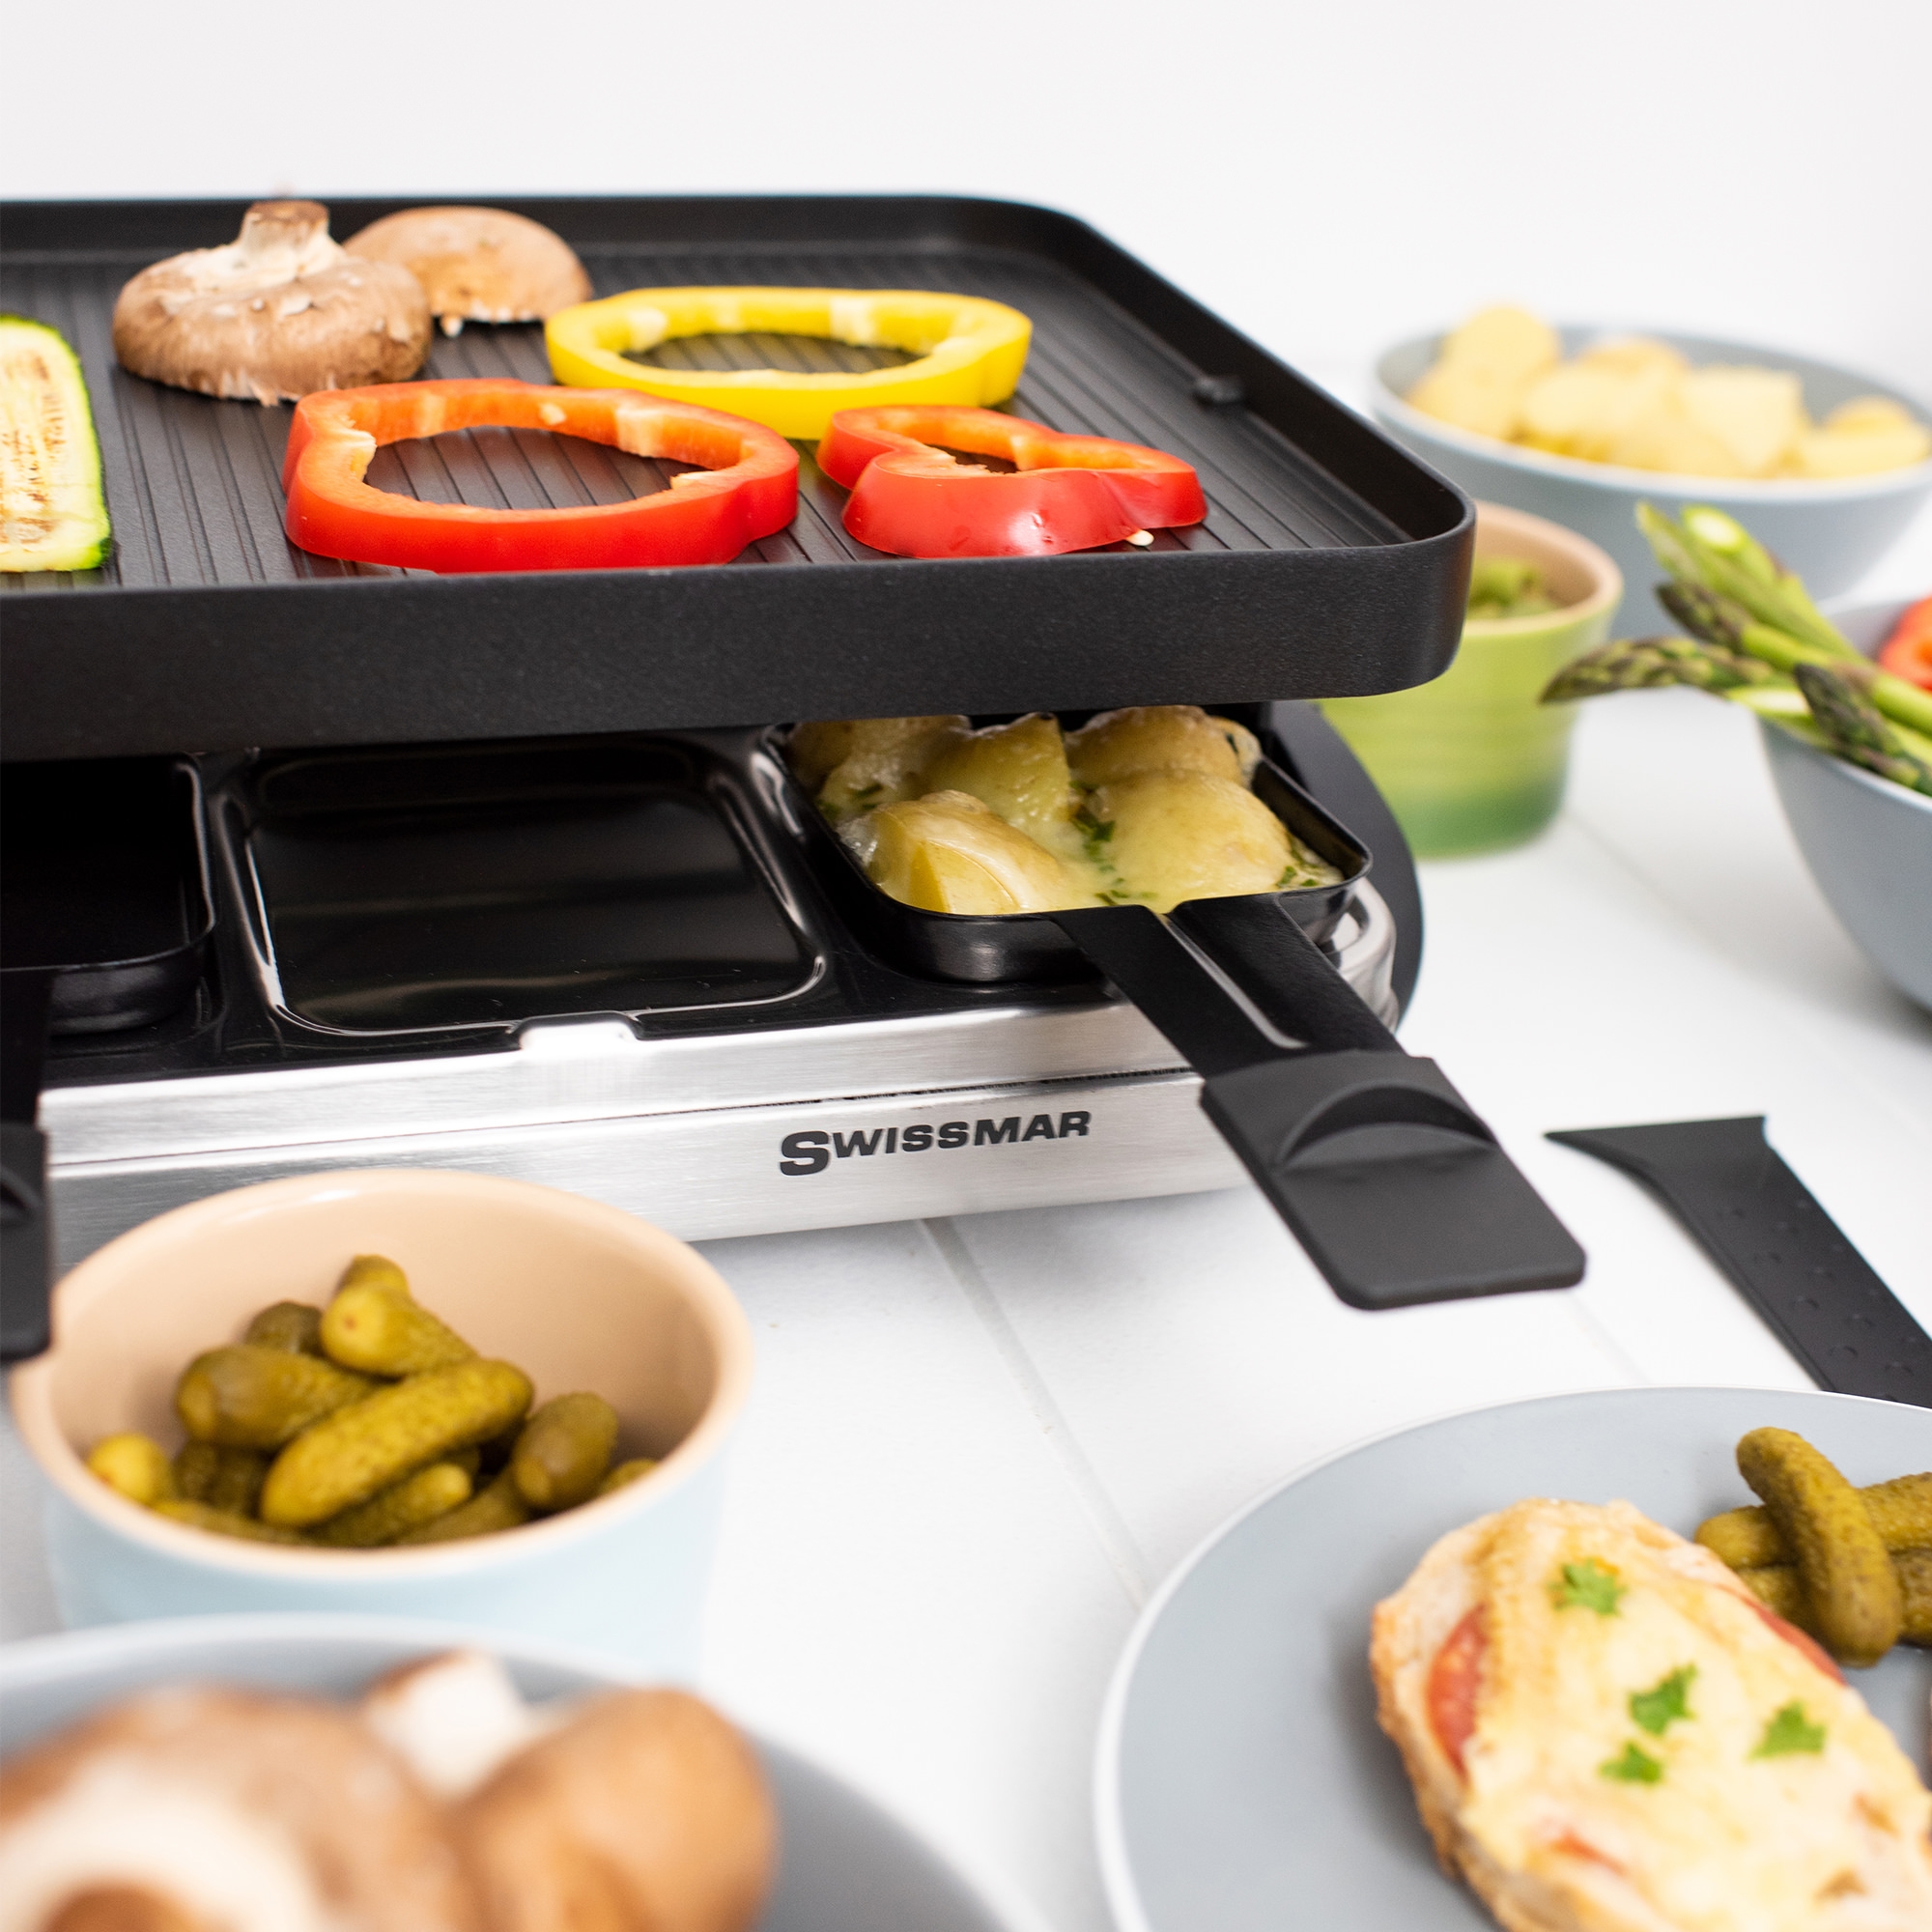 Swissmar Valais 8 Person Raclette Party Grill Stainless Steel Image 2